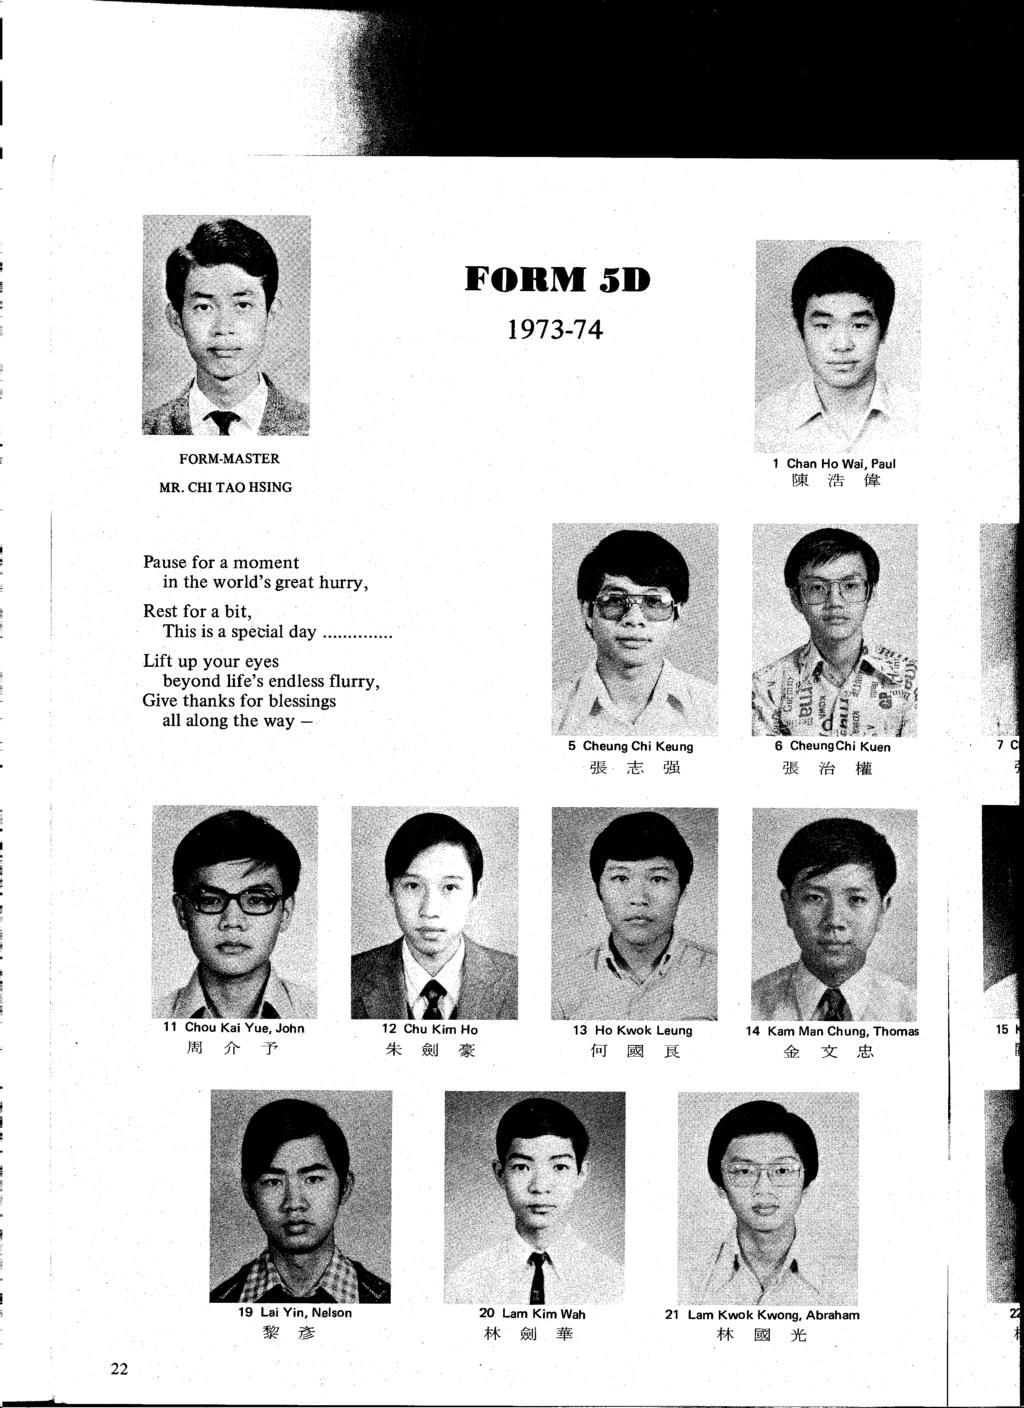 FORM5D 1973-74 FORM-MASTER MR. CHI TAO HSING 1 Chan Ho Wai, Paul Il* f.!i ffl,: Pause for a moment in the world's great hurry, Rest for a bit, This is a special day.